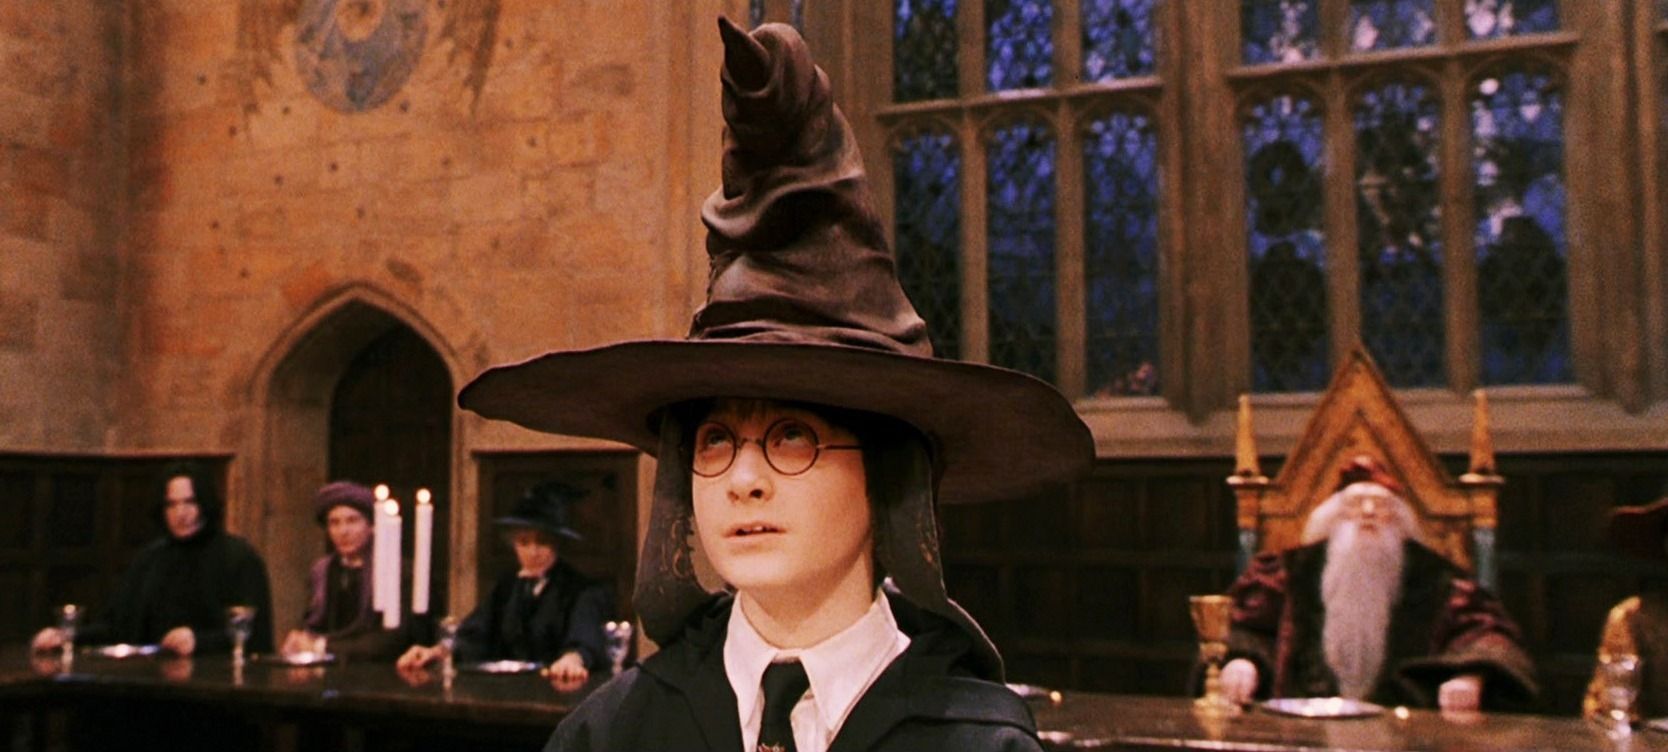 where to watch the harry potter movies